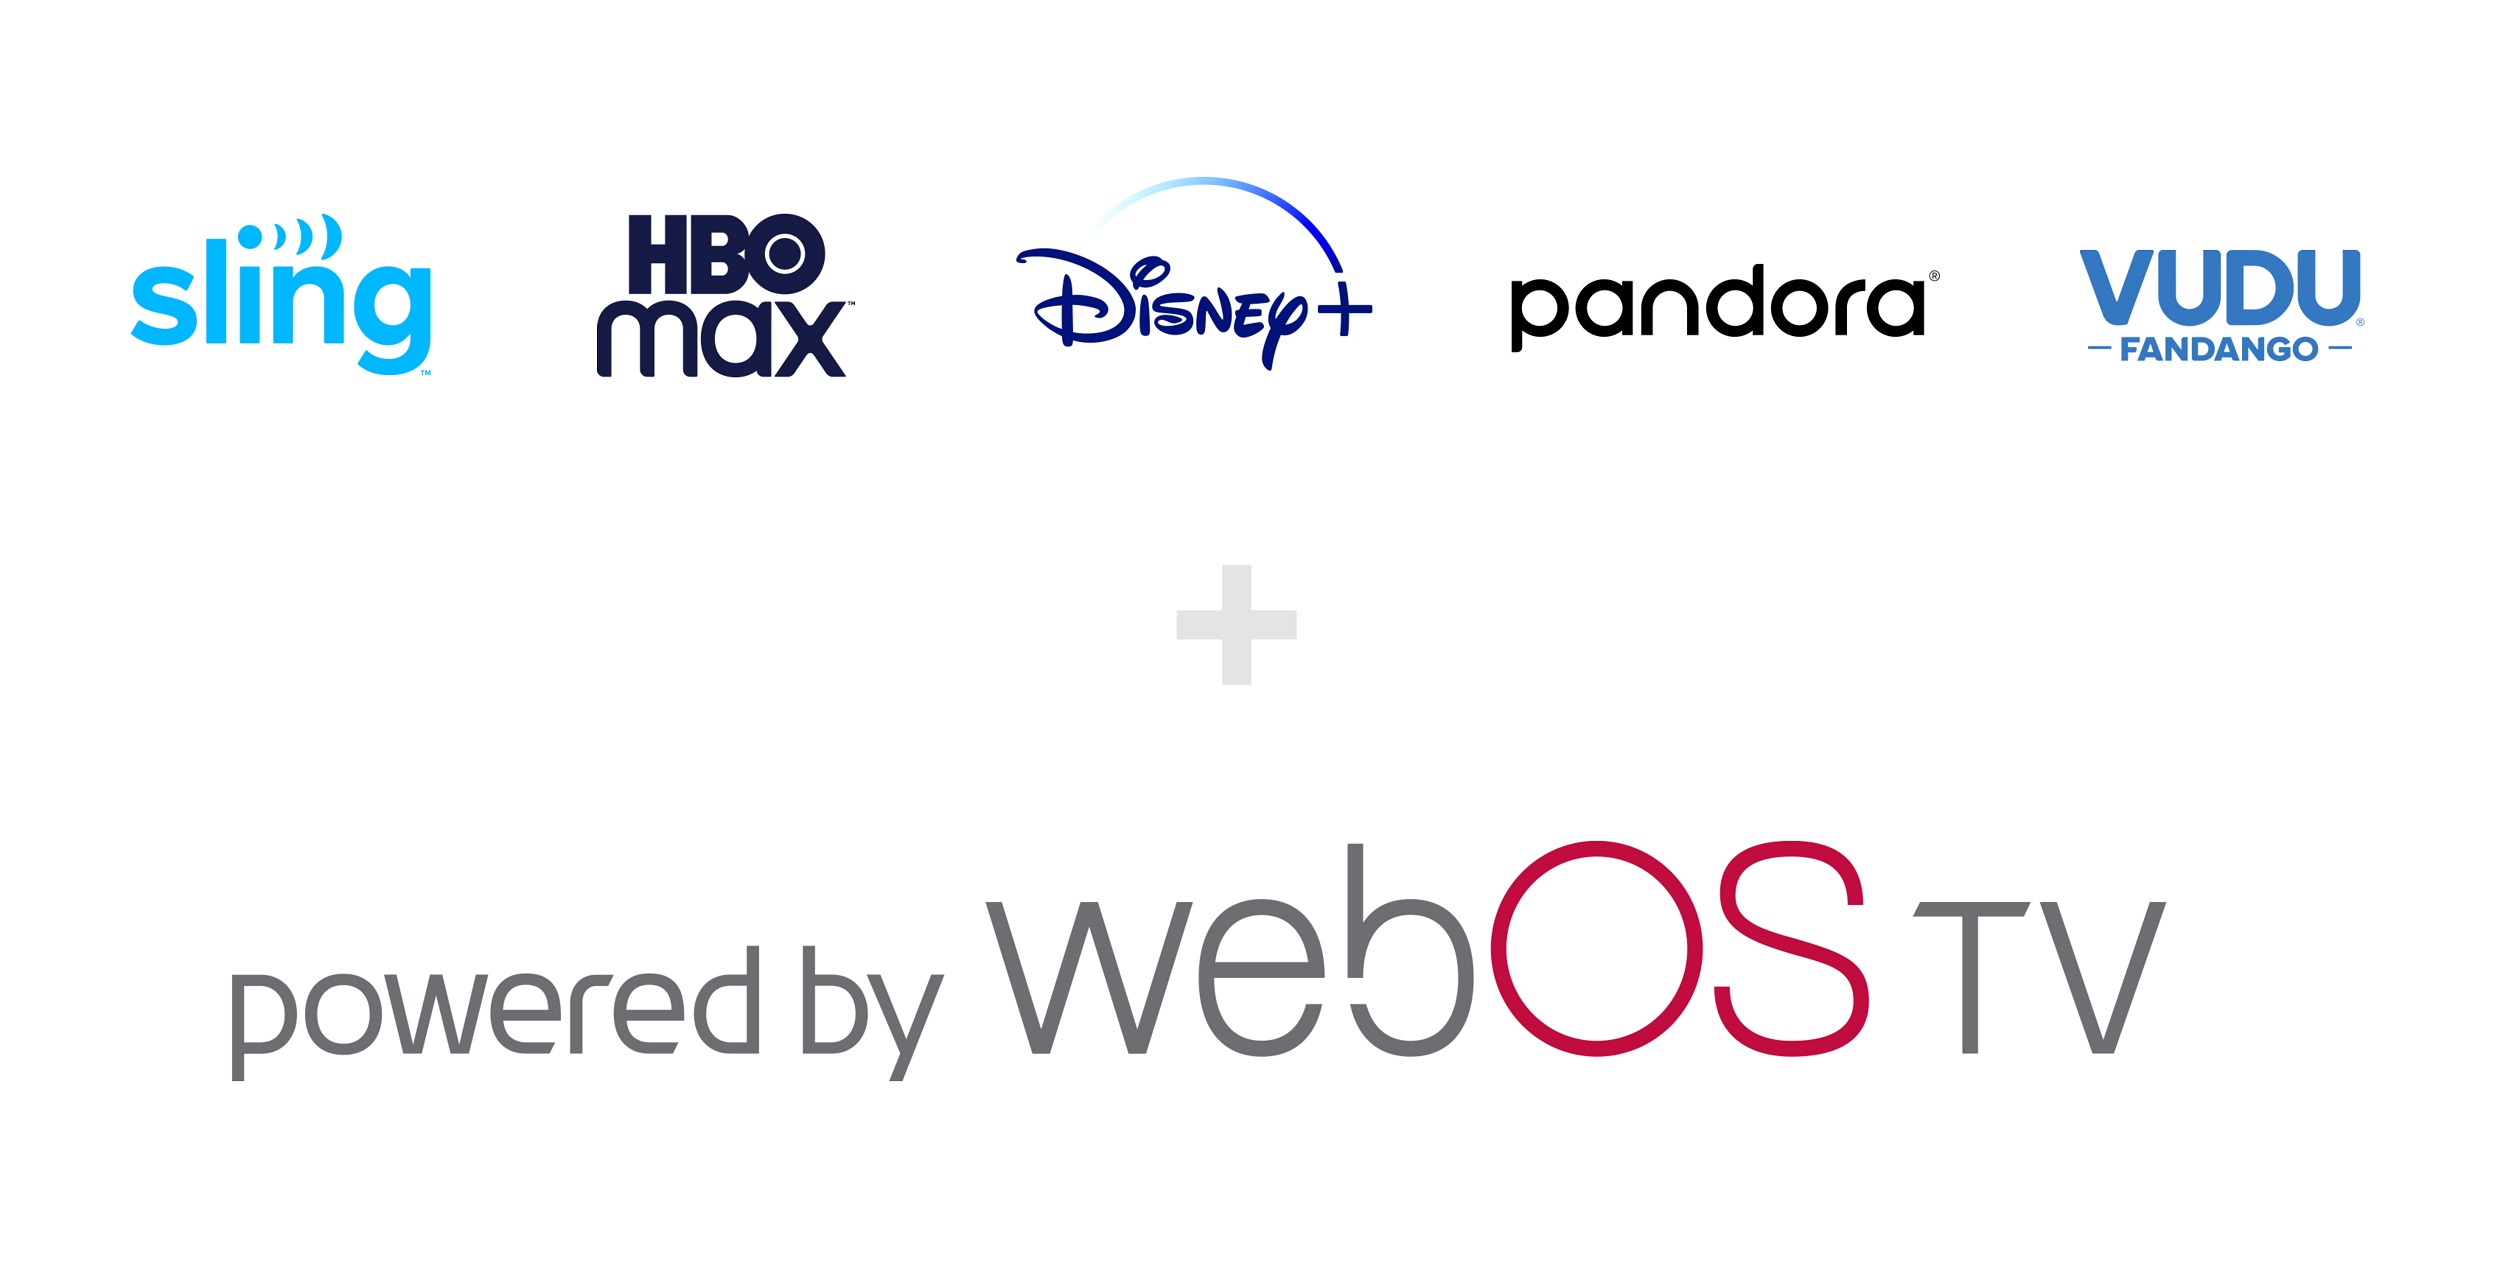 The ‘powered by webOS TV’ logo below the logos of popular global streaming services coming to the TVs 